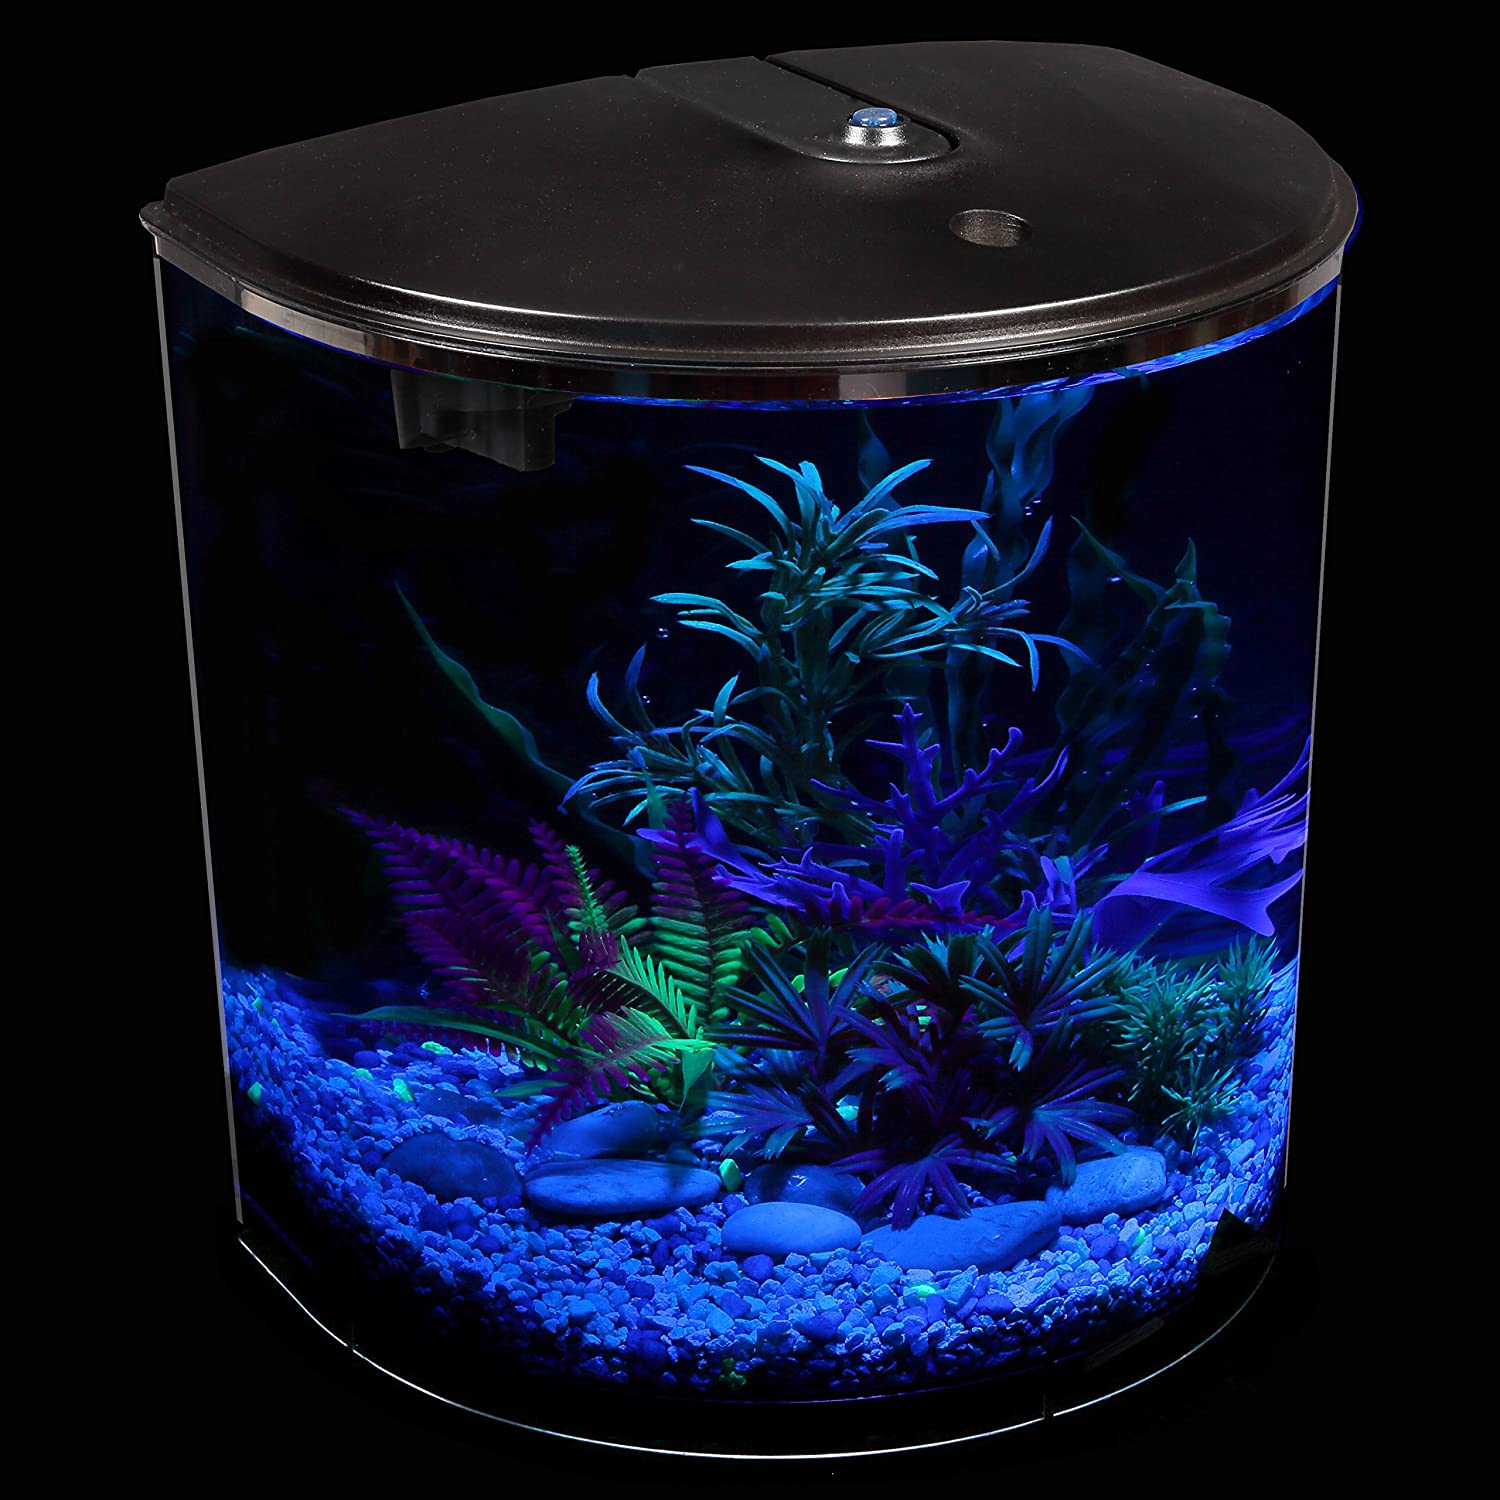 Koller Products 3.5Gallon Aquarium with Power Filter, LED